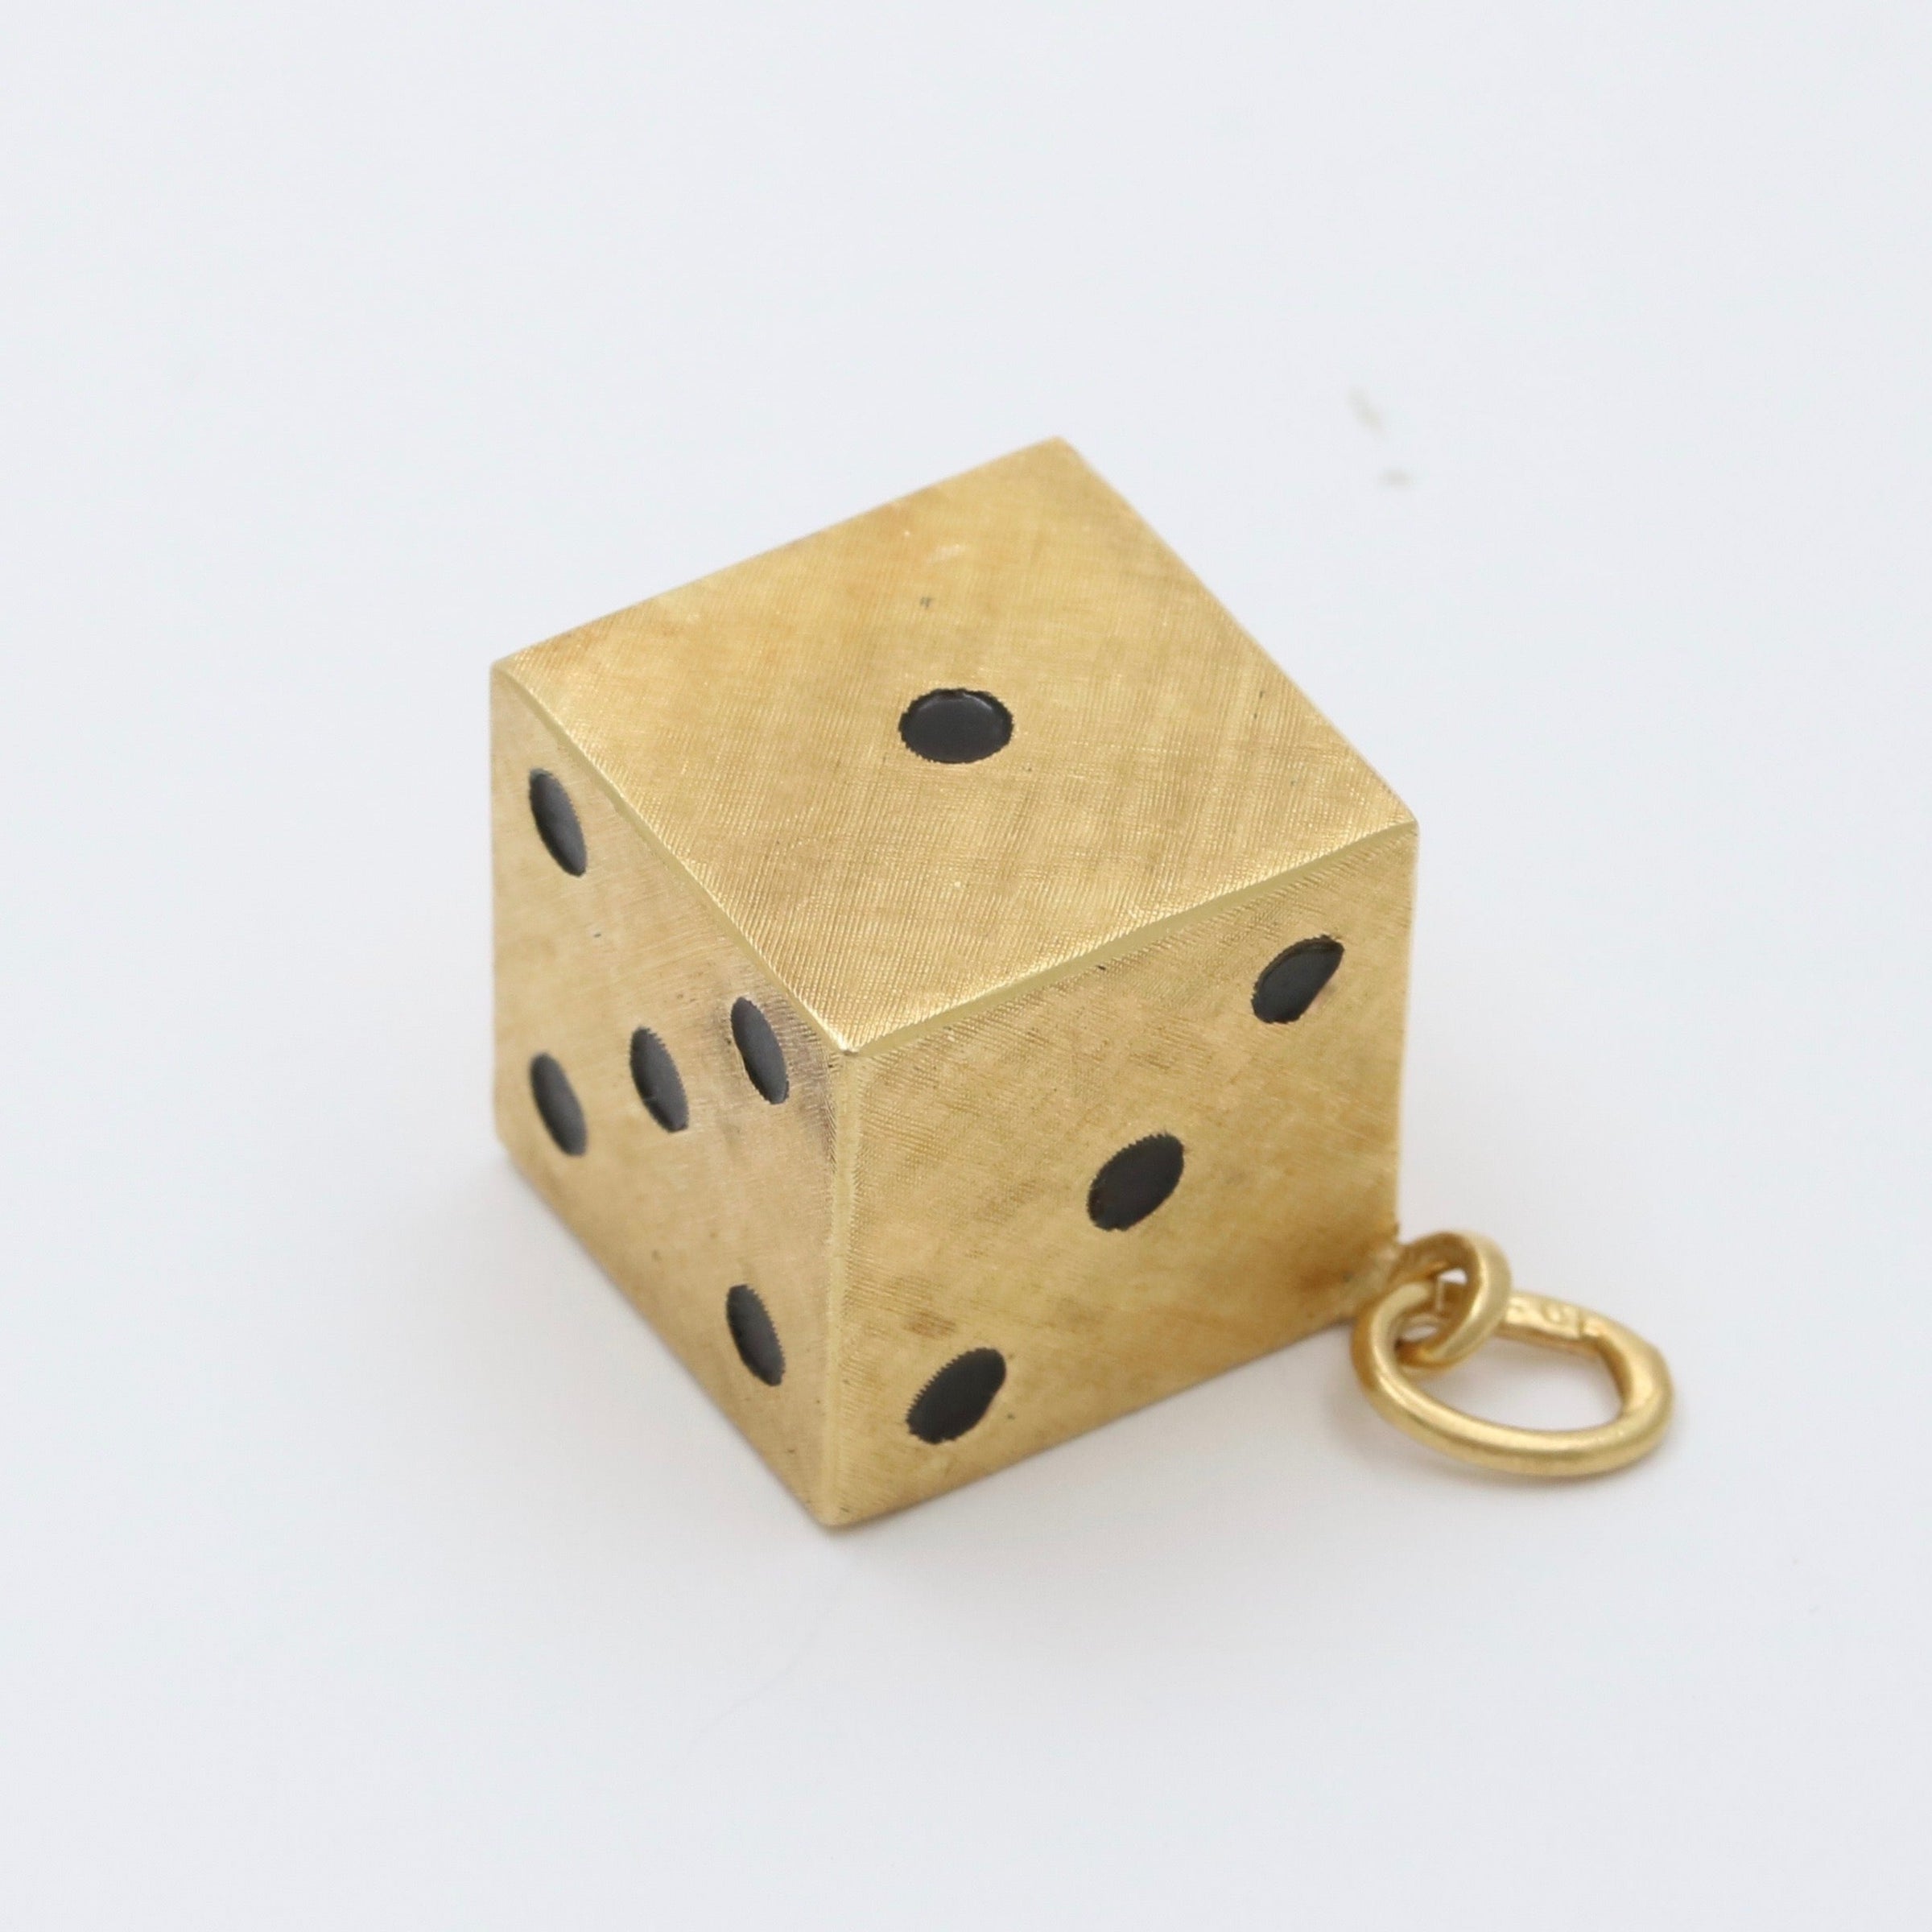 Dice Charm, Charms for Bracelets and Necklaces